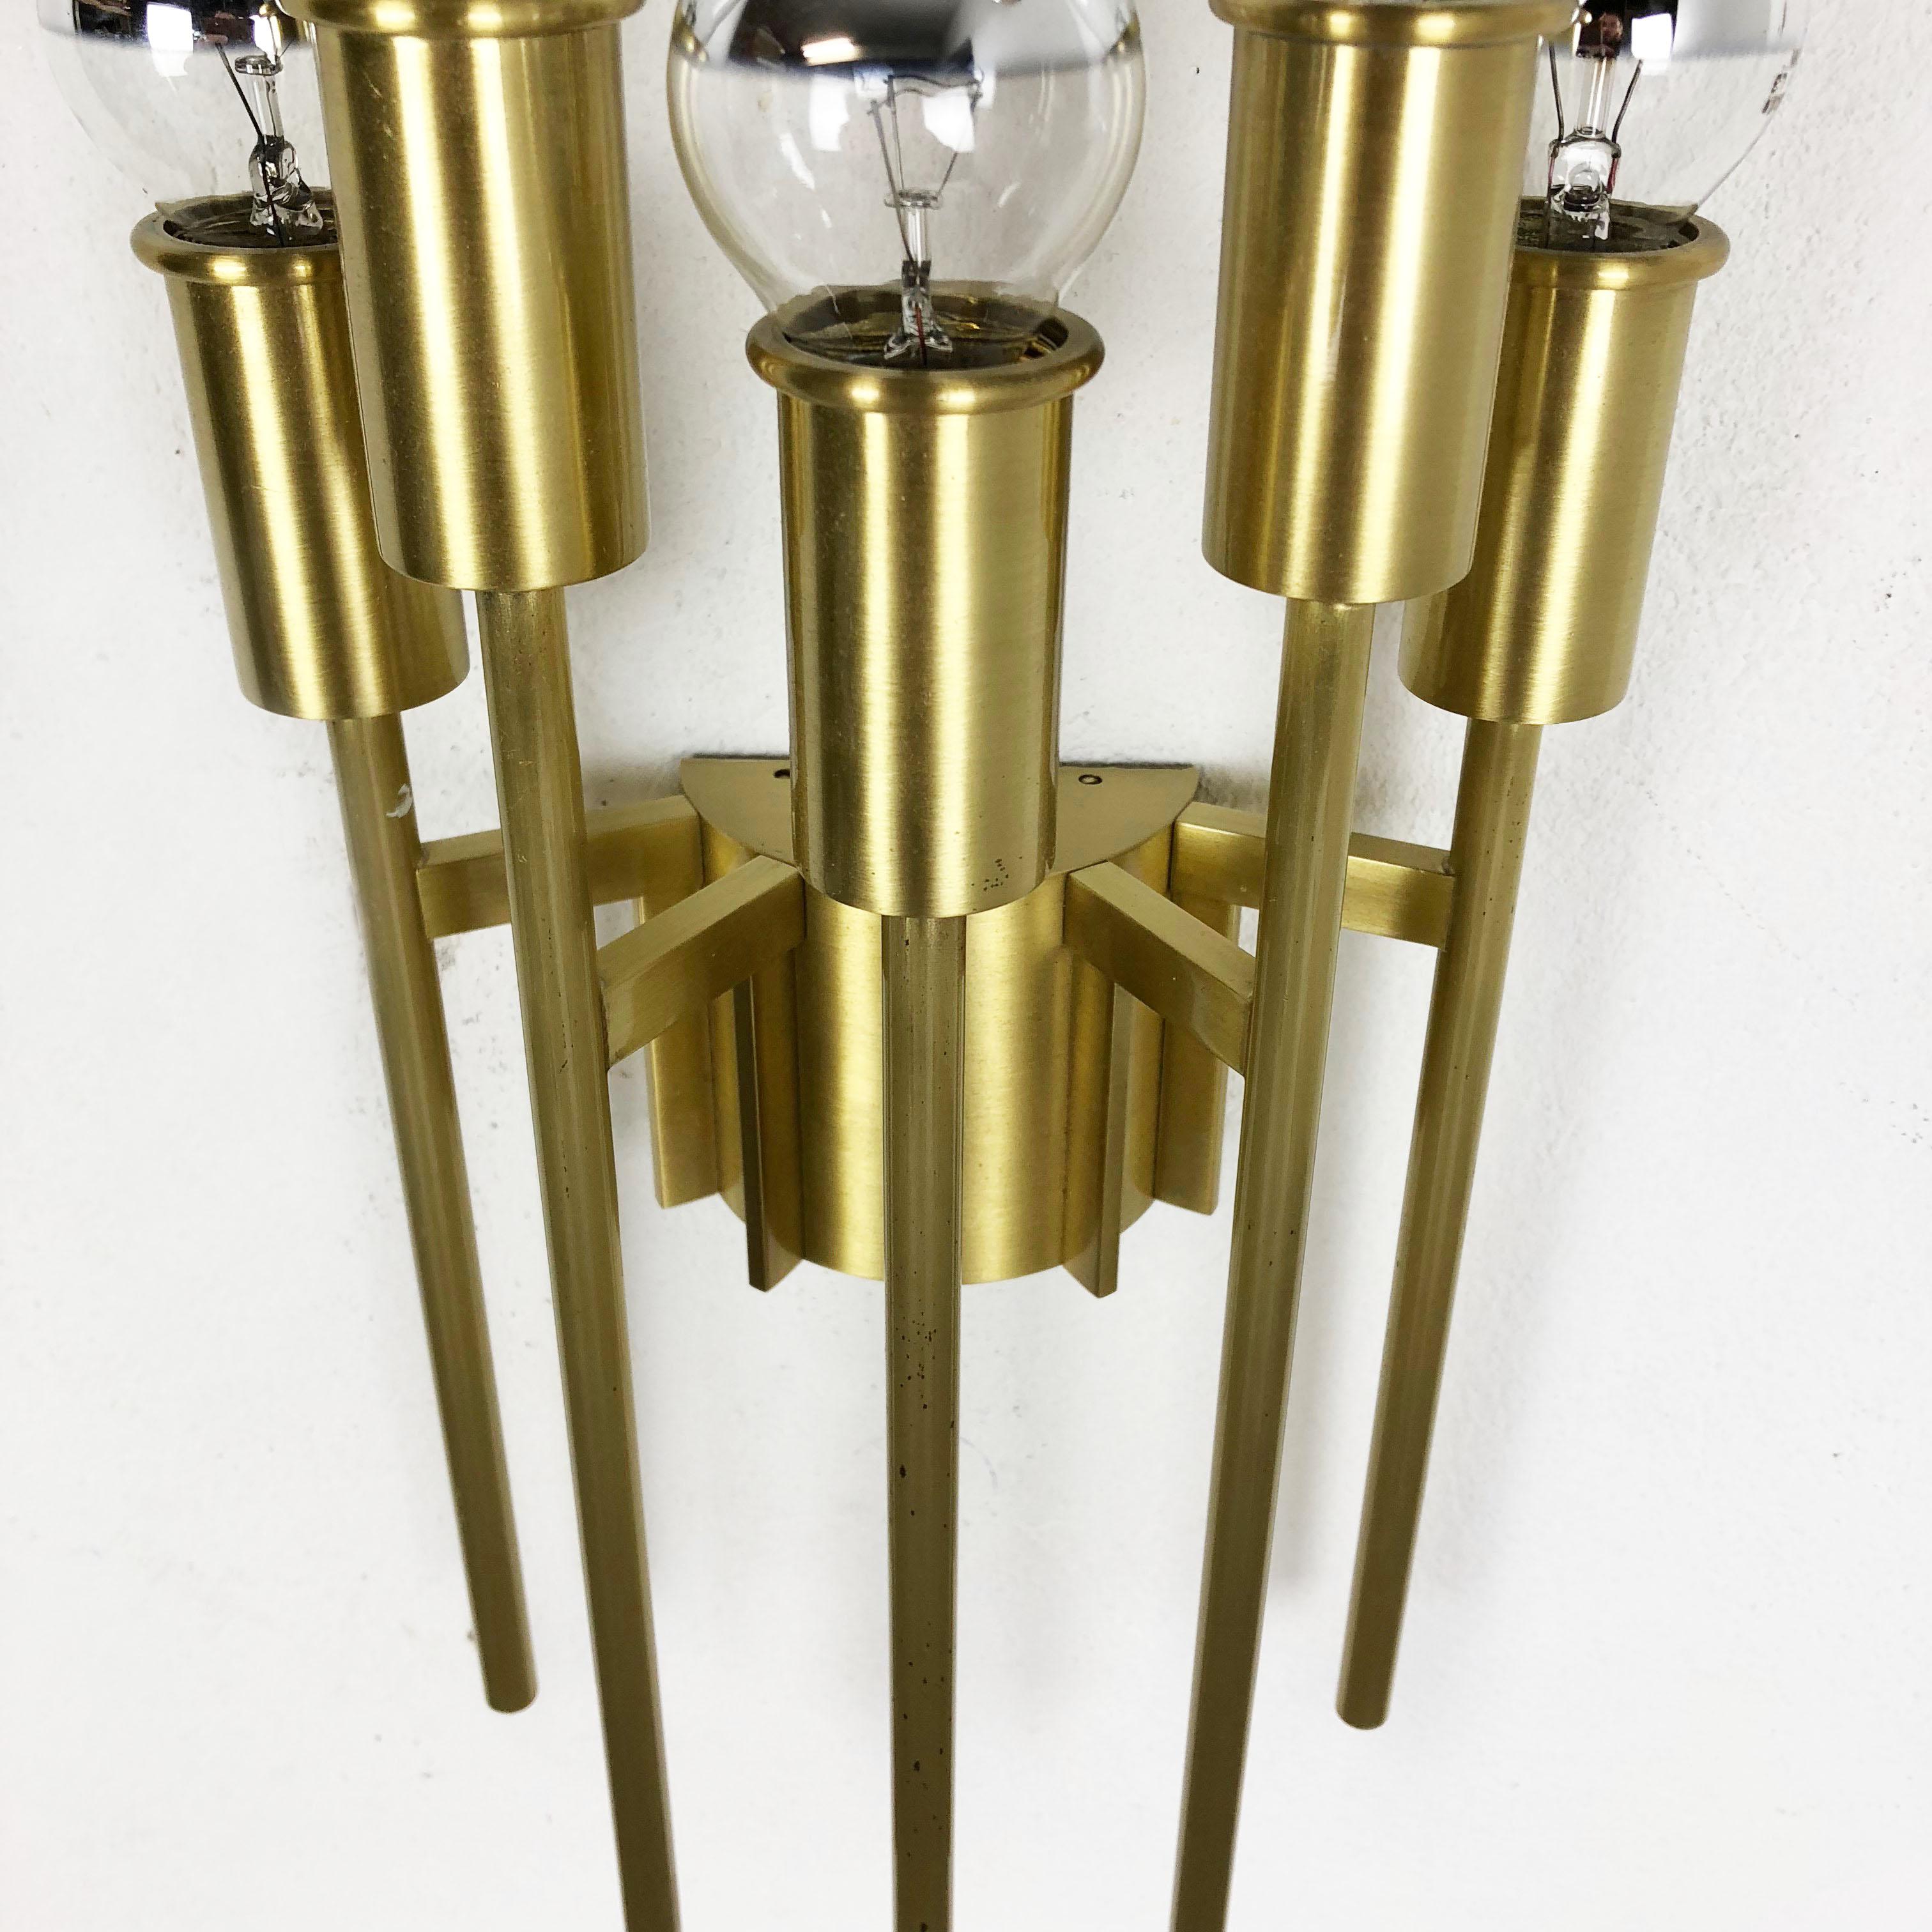 Brass Italian Stilnovo Style Theatre Wall Ceiling Light Sconces, Italy, 1970s For Sale 2